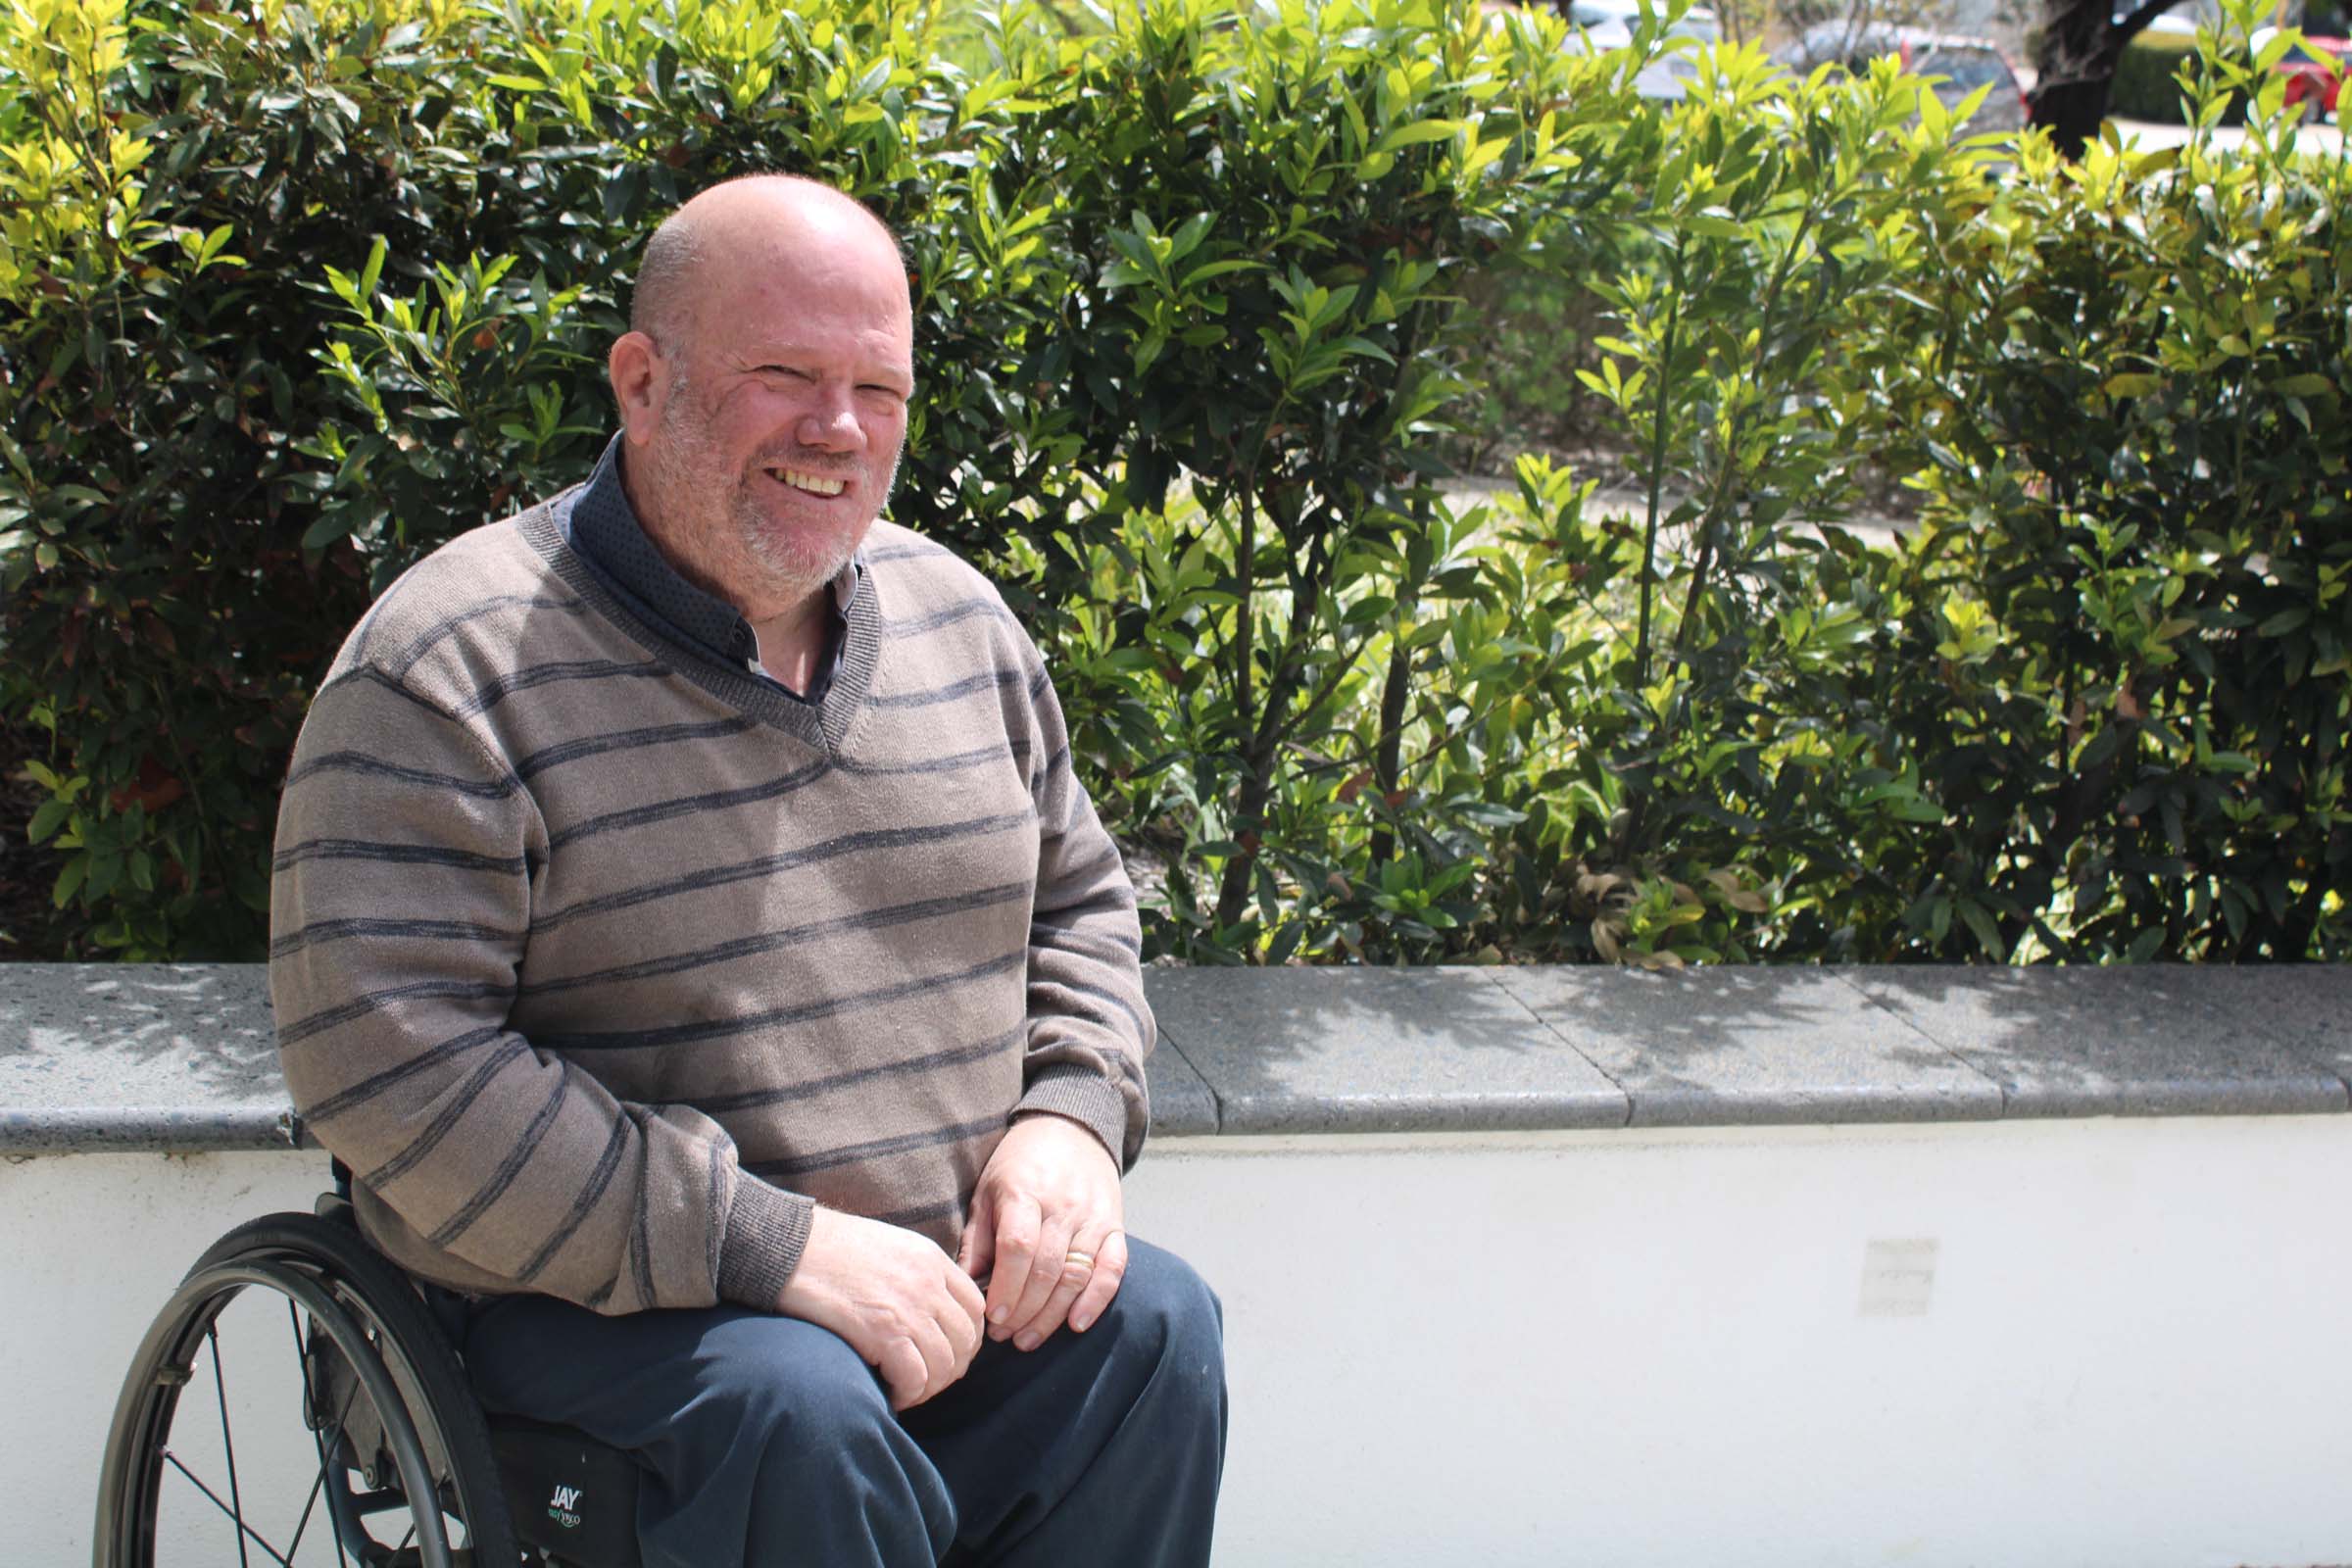 A man sits in a wheelchair next to a garden bed and smiles at the camera.